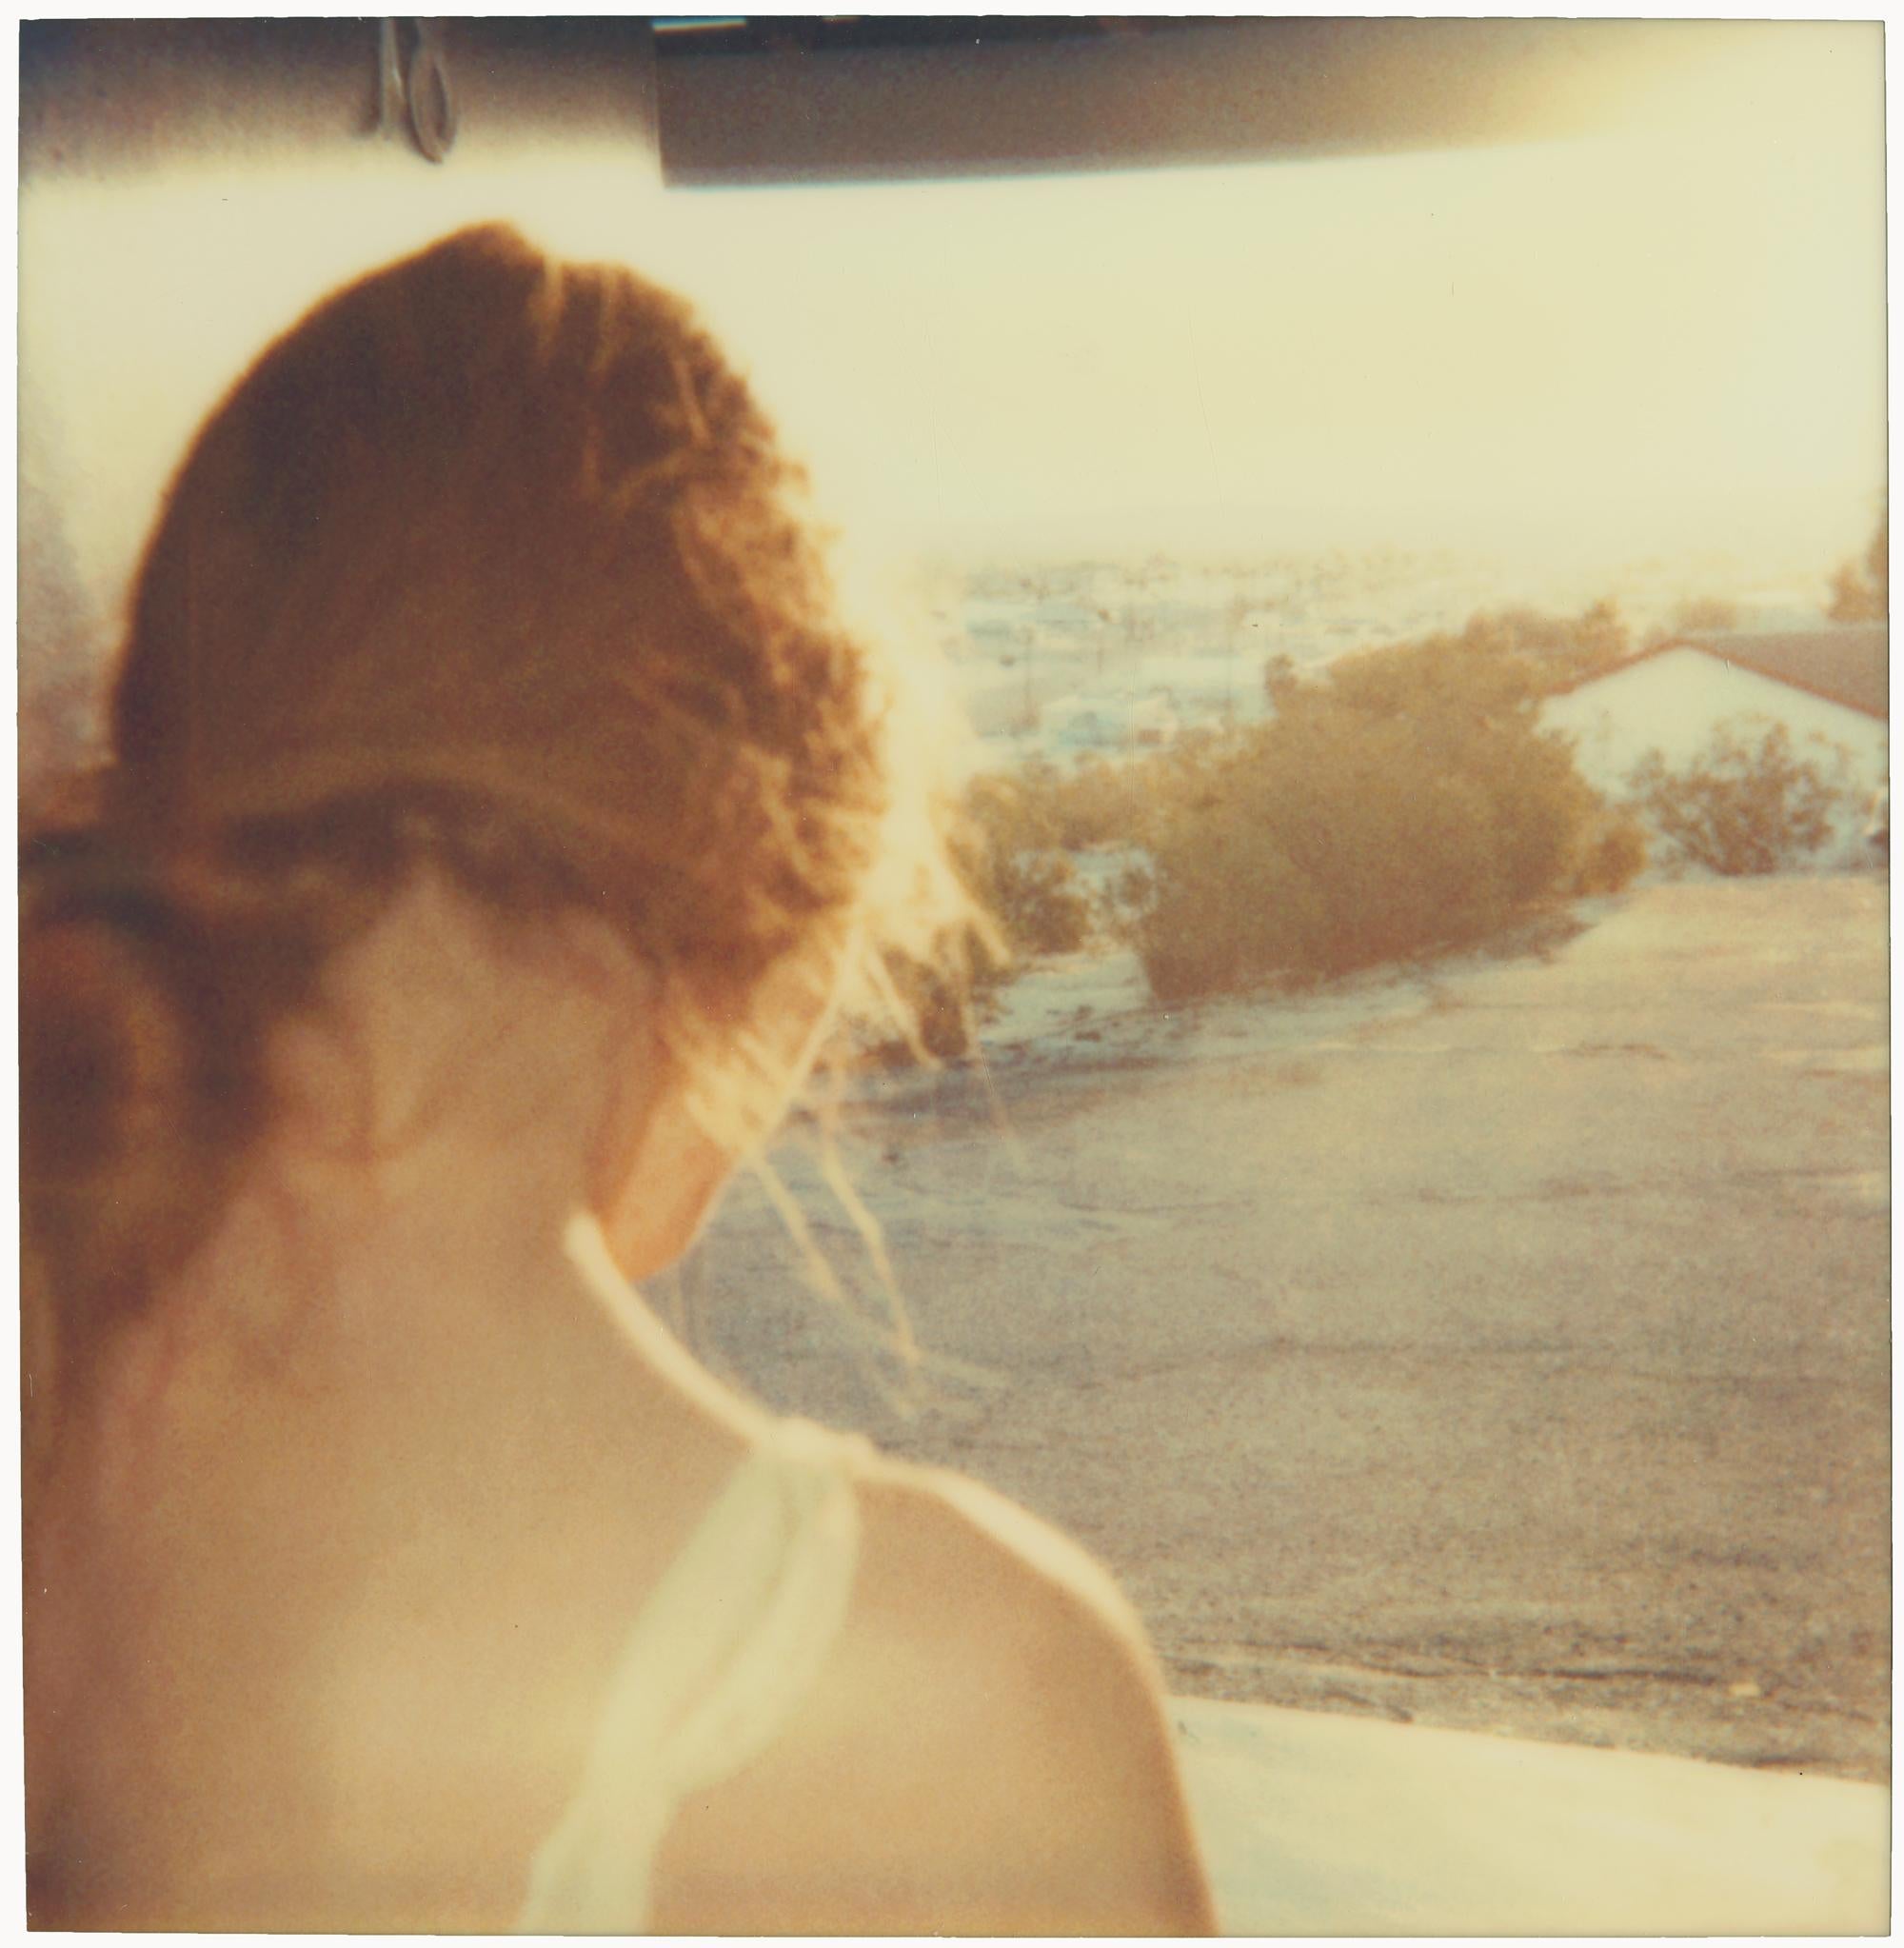 Hillview Motel (Last Picture Show) - analog, vintage, based on 3 Polaroids - Contemporary Photograph by Stefanie Schneider